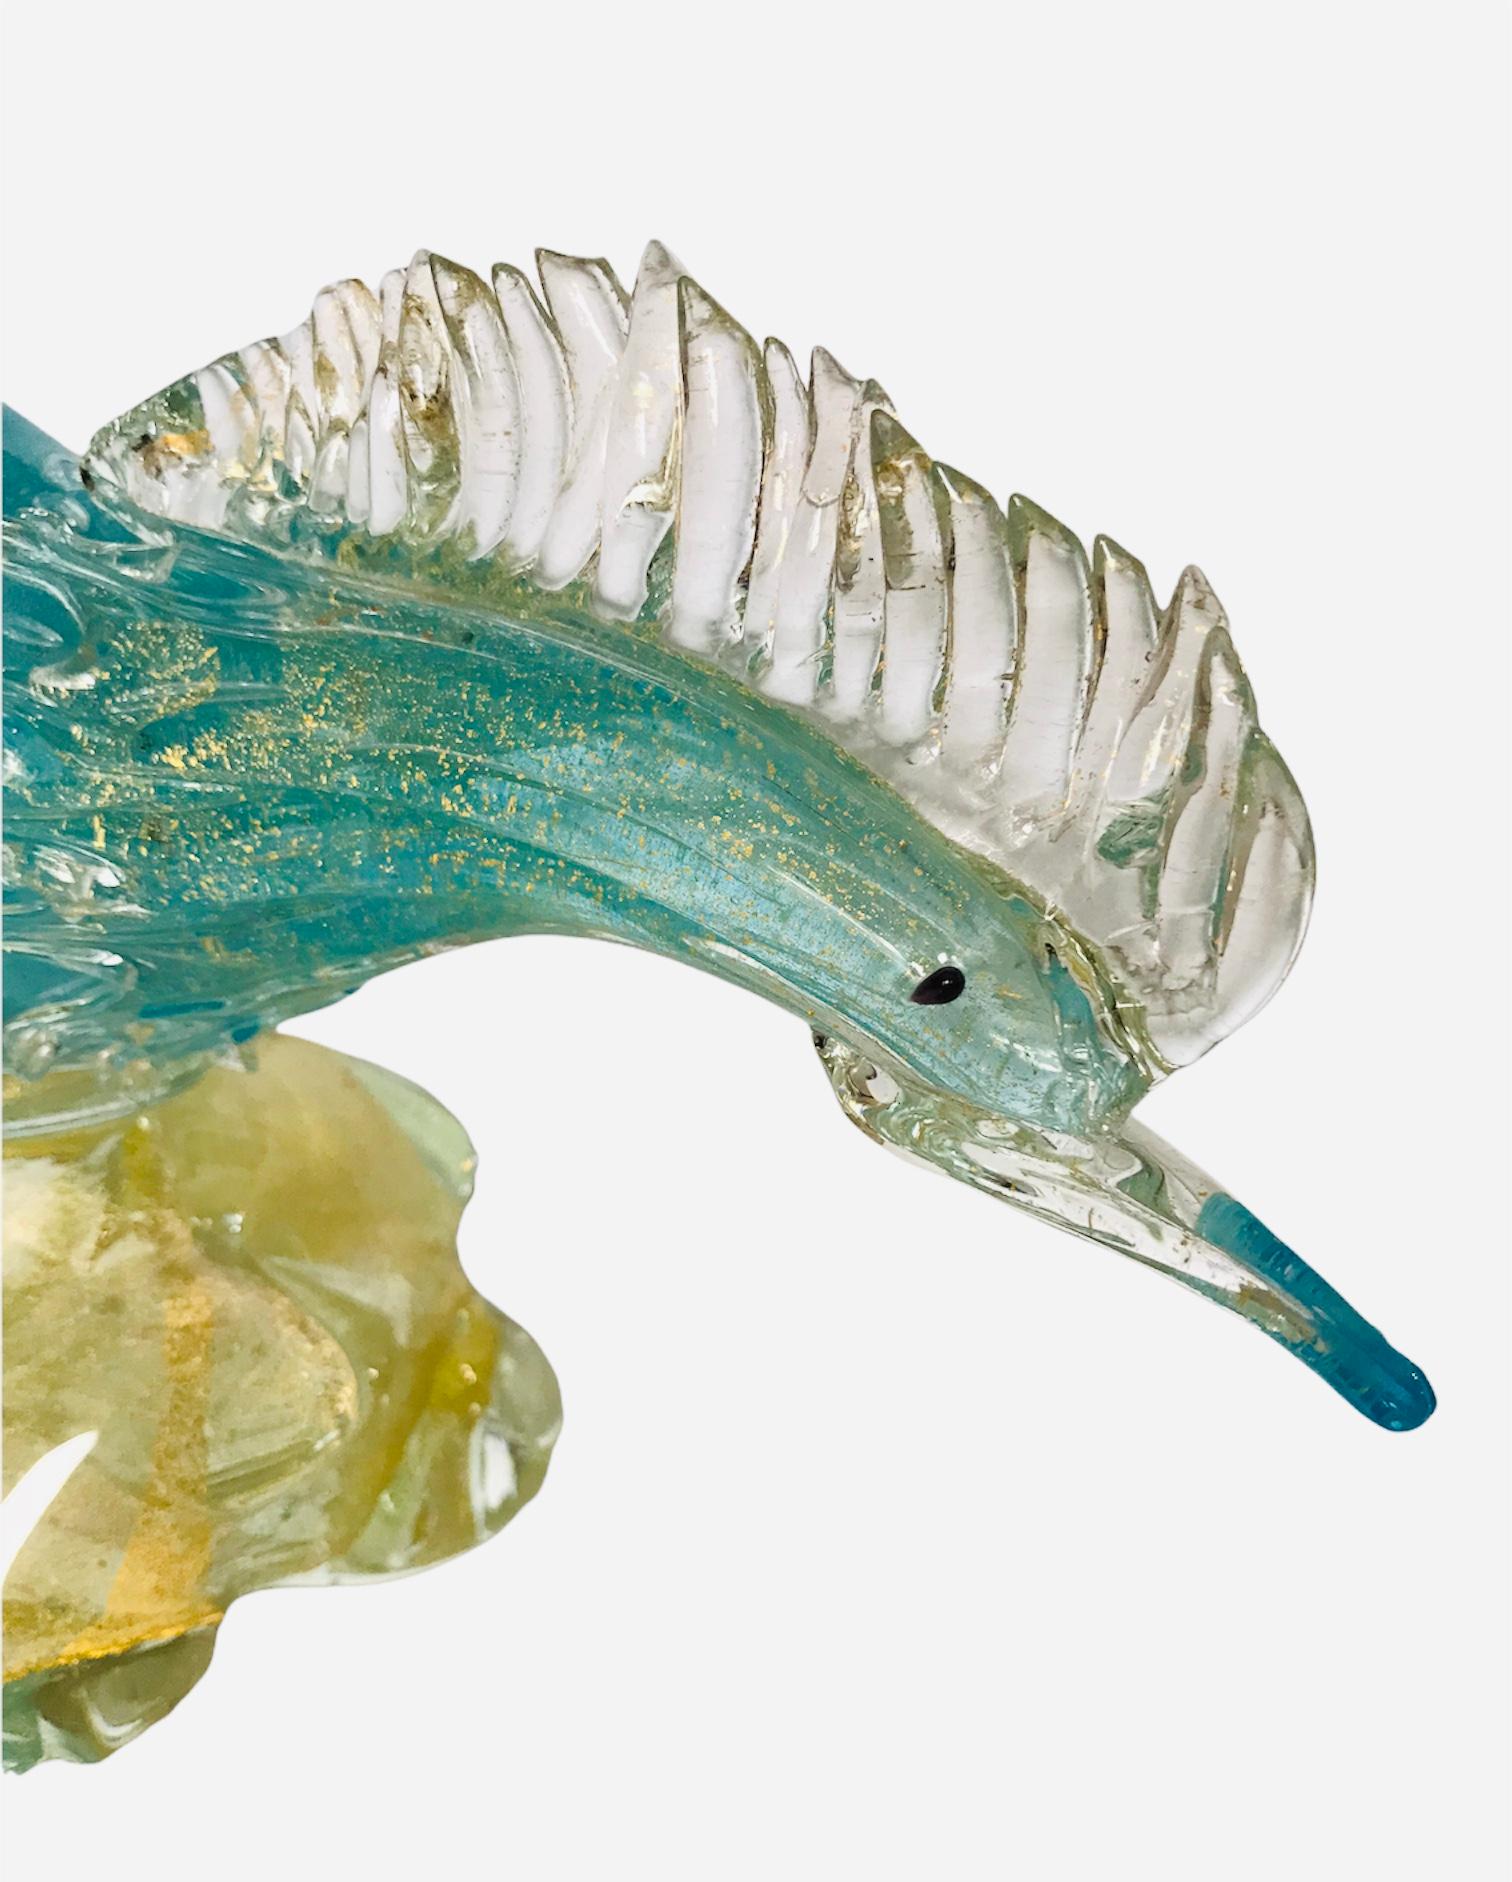 This 50’s Italian Murano glass pheasant bird figurine is a colorful representation of Mid-Century modern decor. Tall in stature, the beautiful hand-blown glass sculpture presents gold flecks amongst the stunning aquamarine shade of blue.